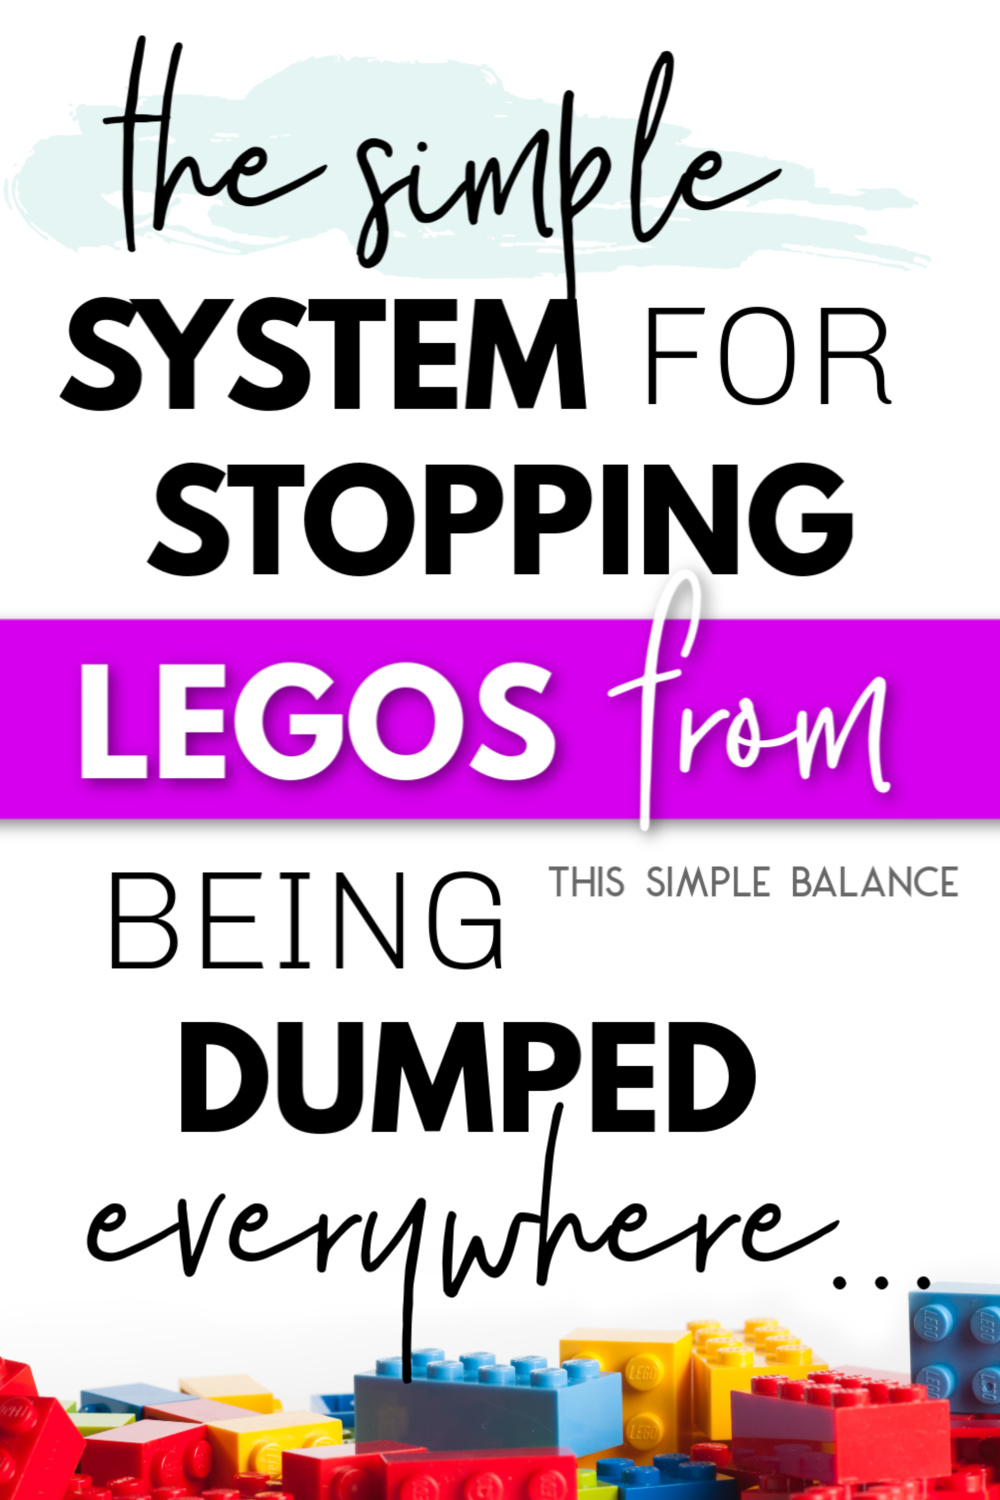 text overlay "the simple system for stopping LEGOs from being dumped everywhere..." with a few lego bricks at bottom of image